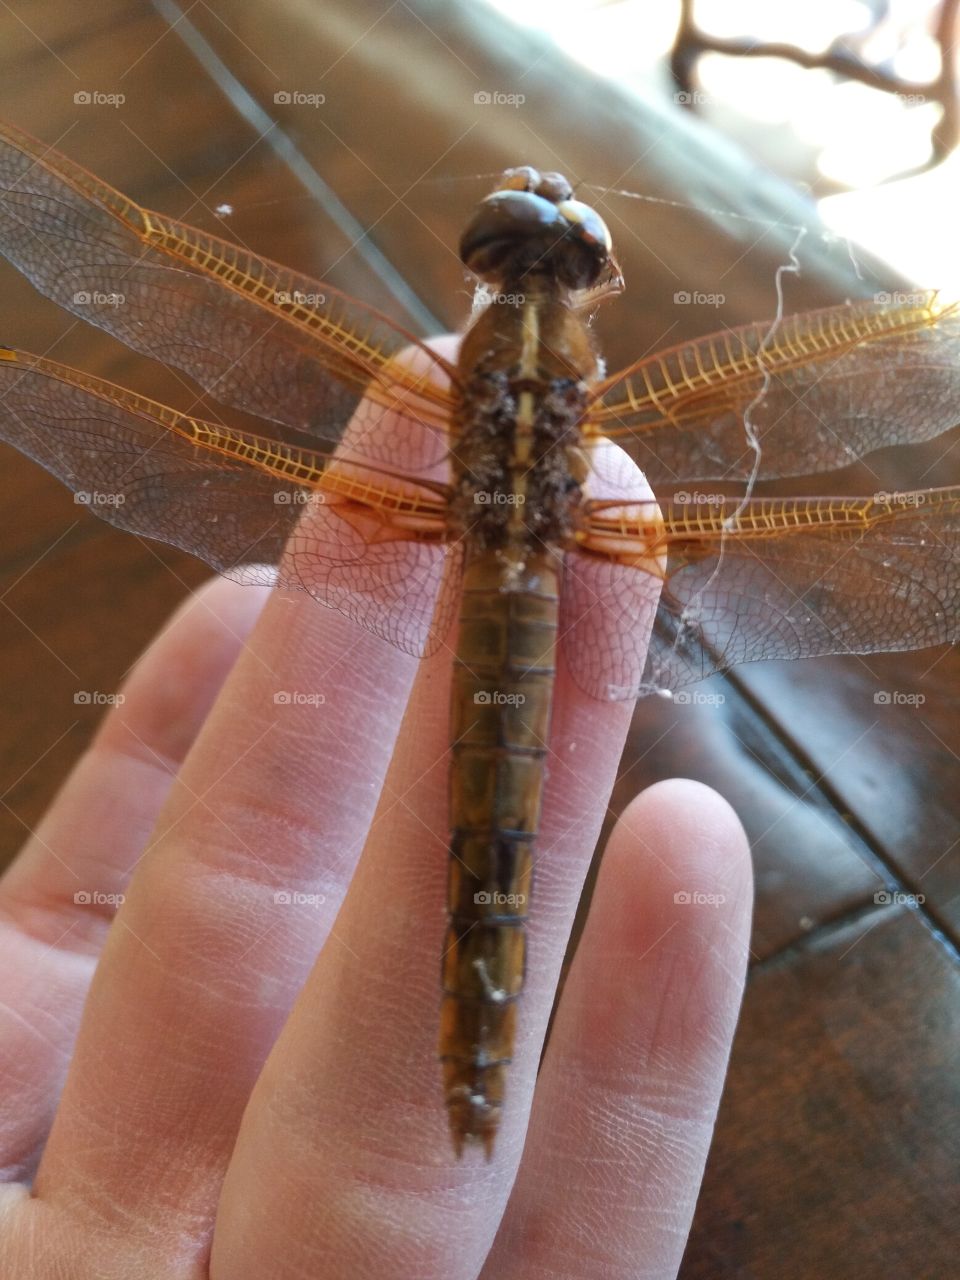 I bet this friggin l dragonfly was as beautiful in life as it is in death.